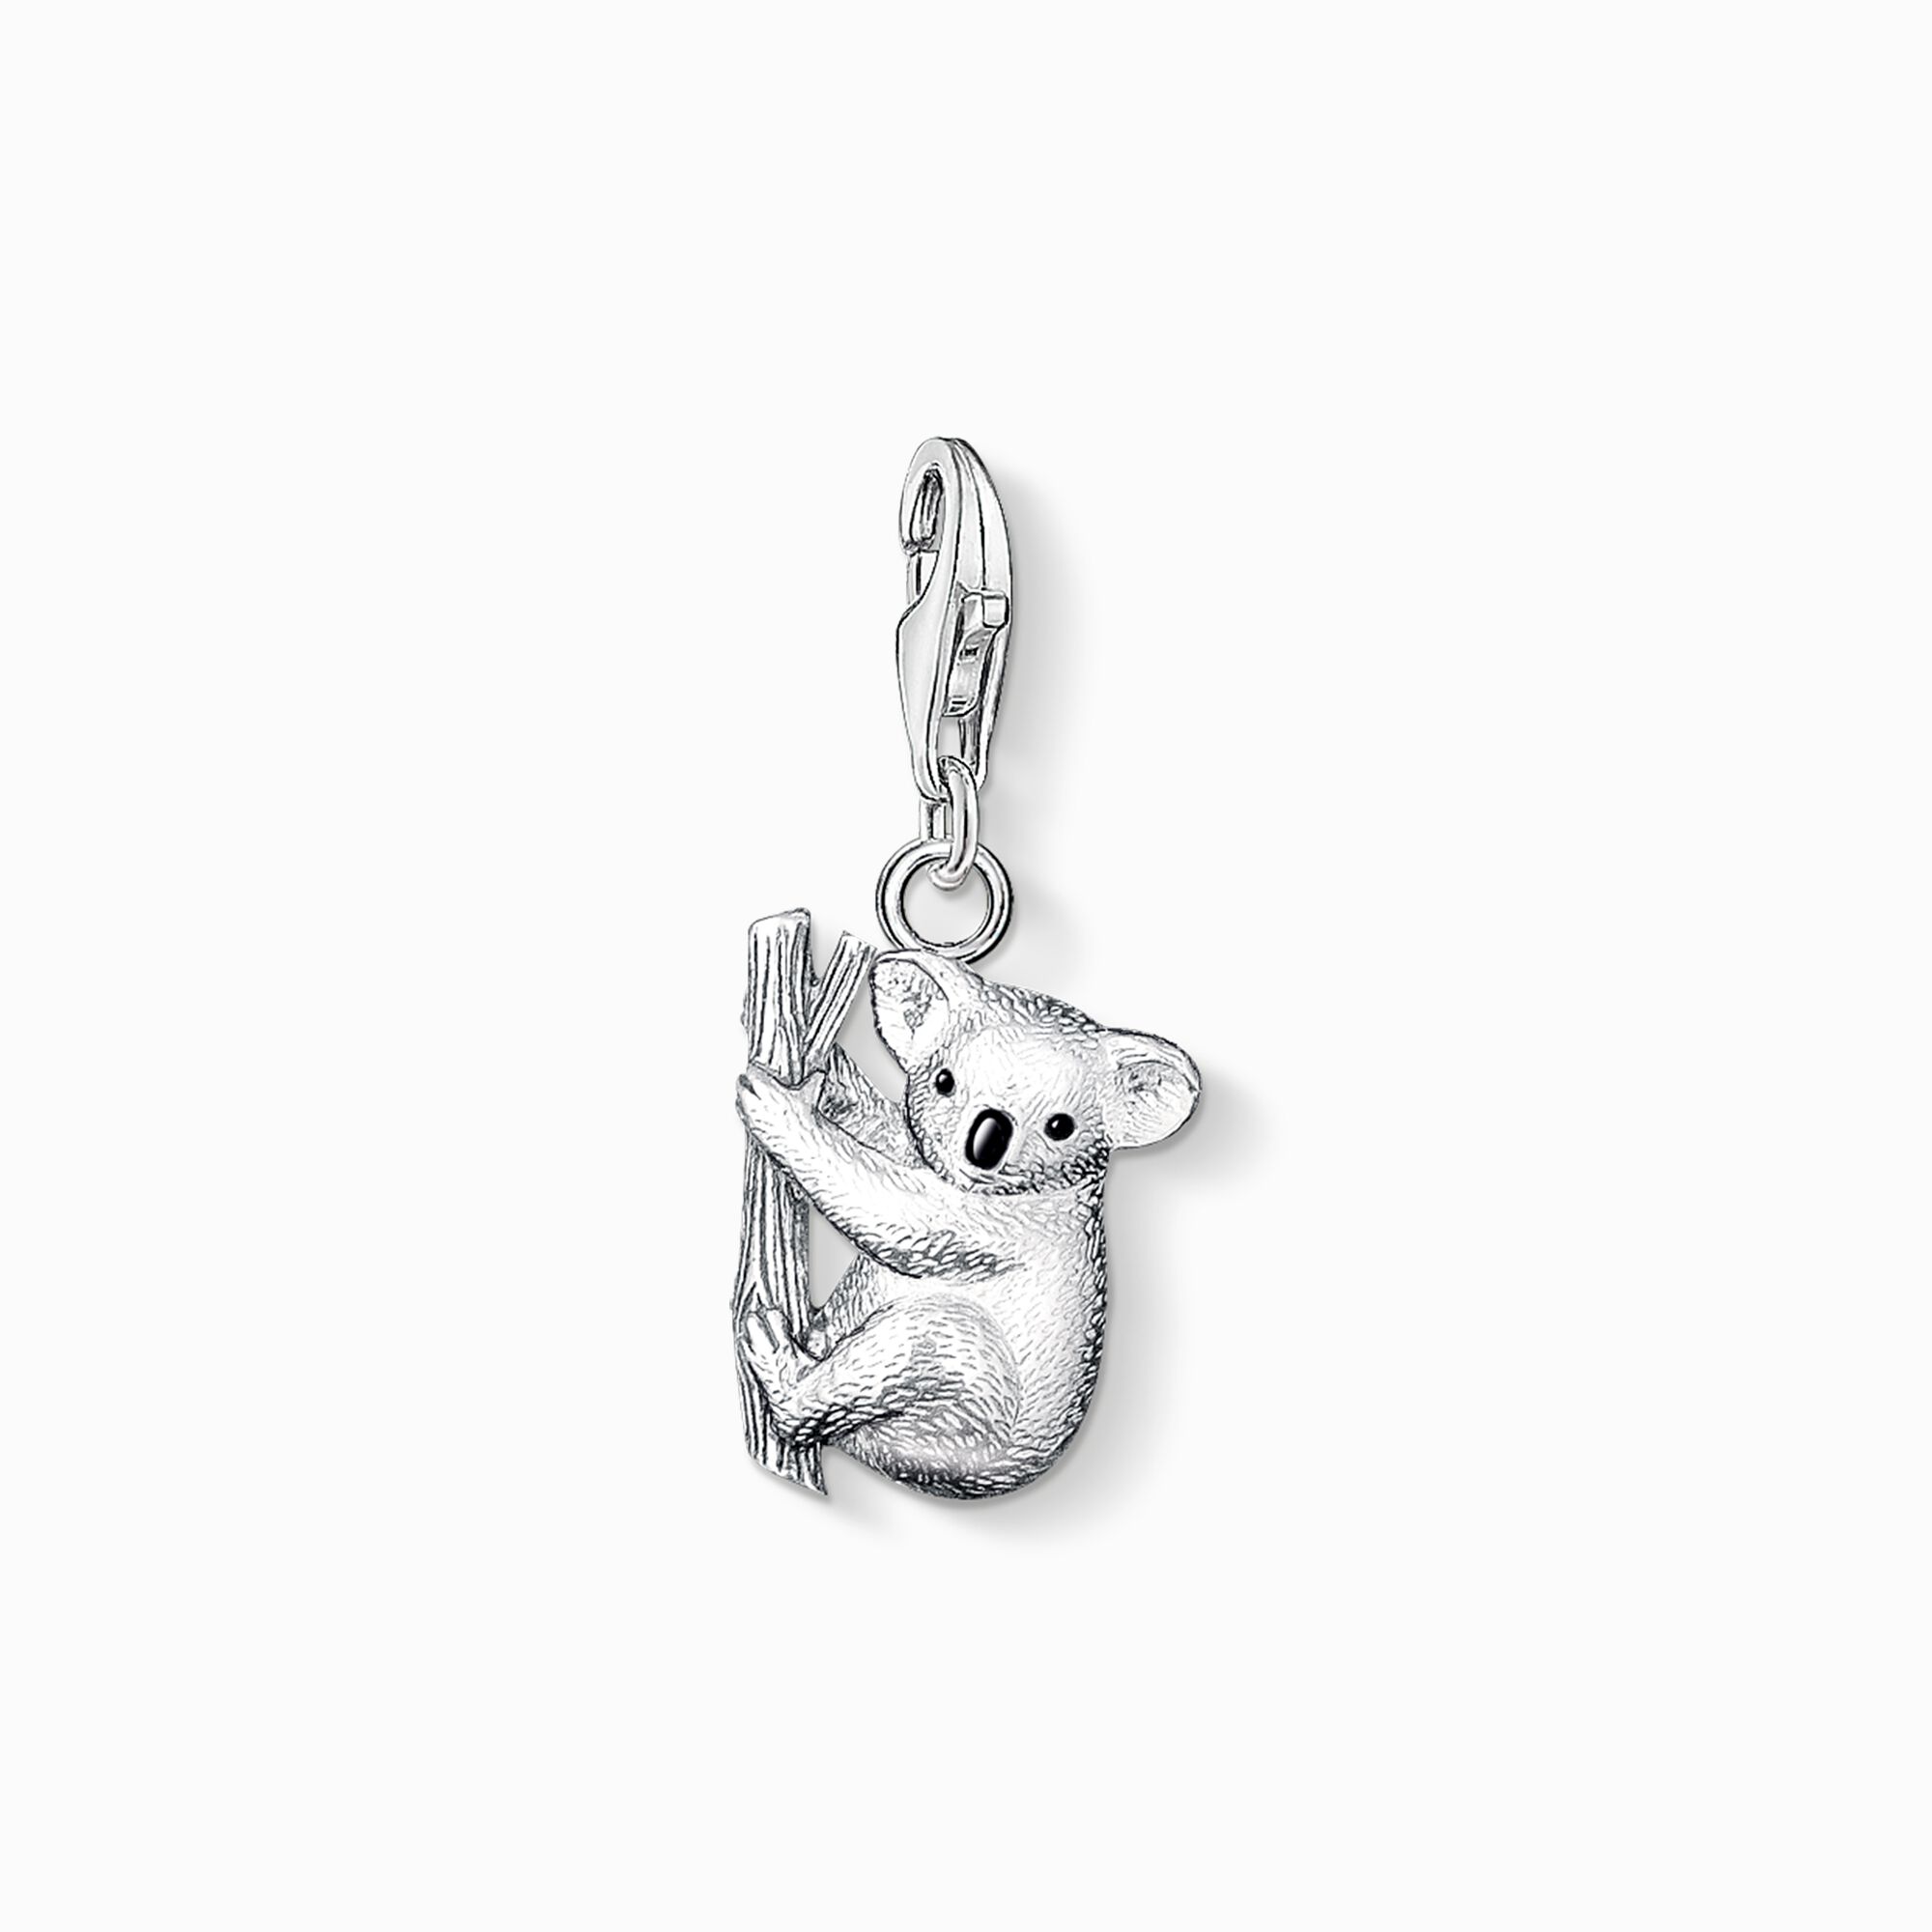 Charm pendant koala from the Charm Club collection in the THOMAS SABO online store